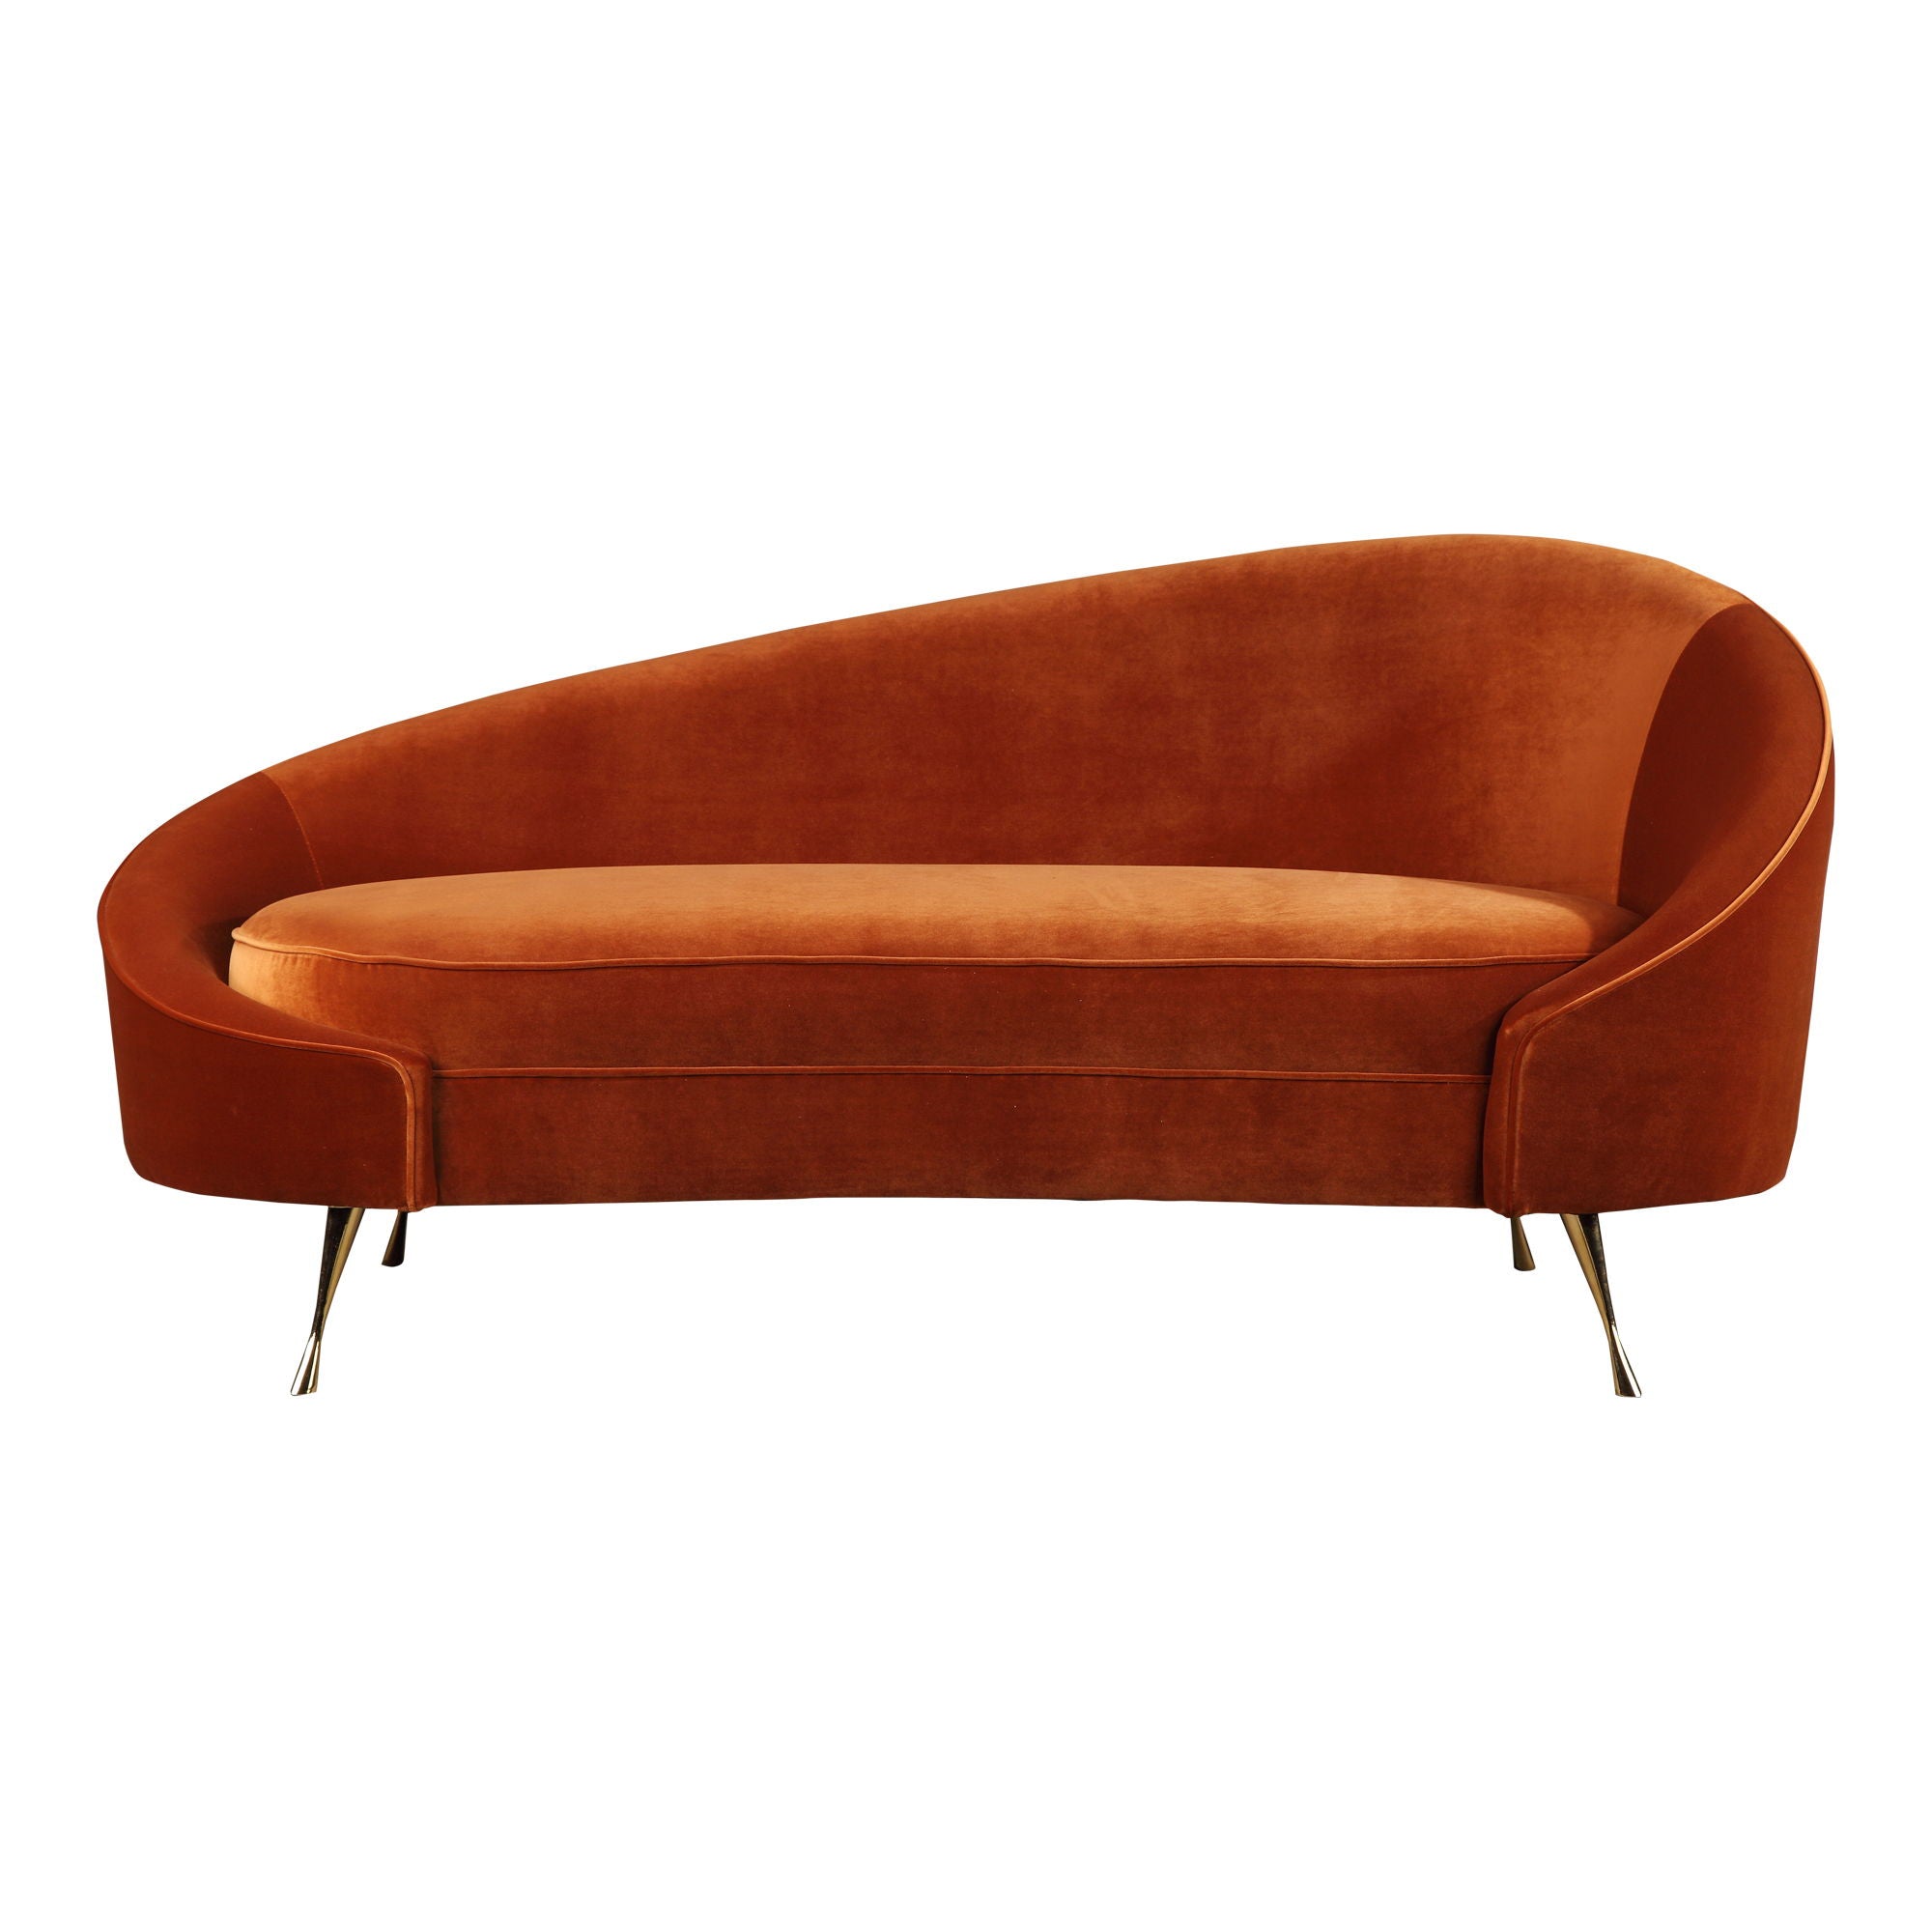 Abigail - Chaise - Umber